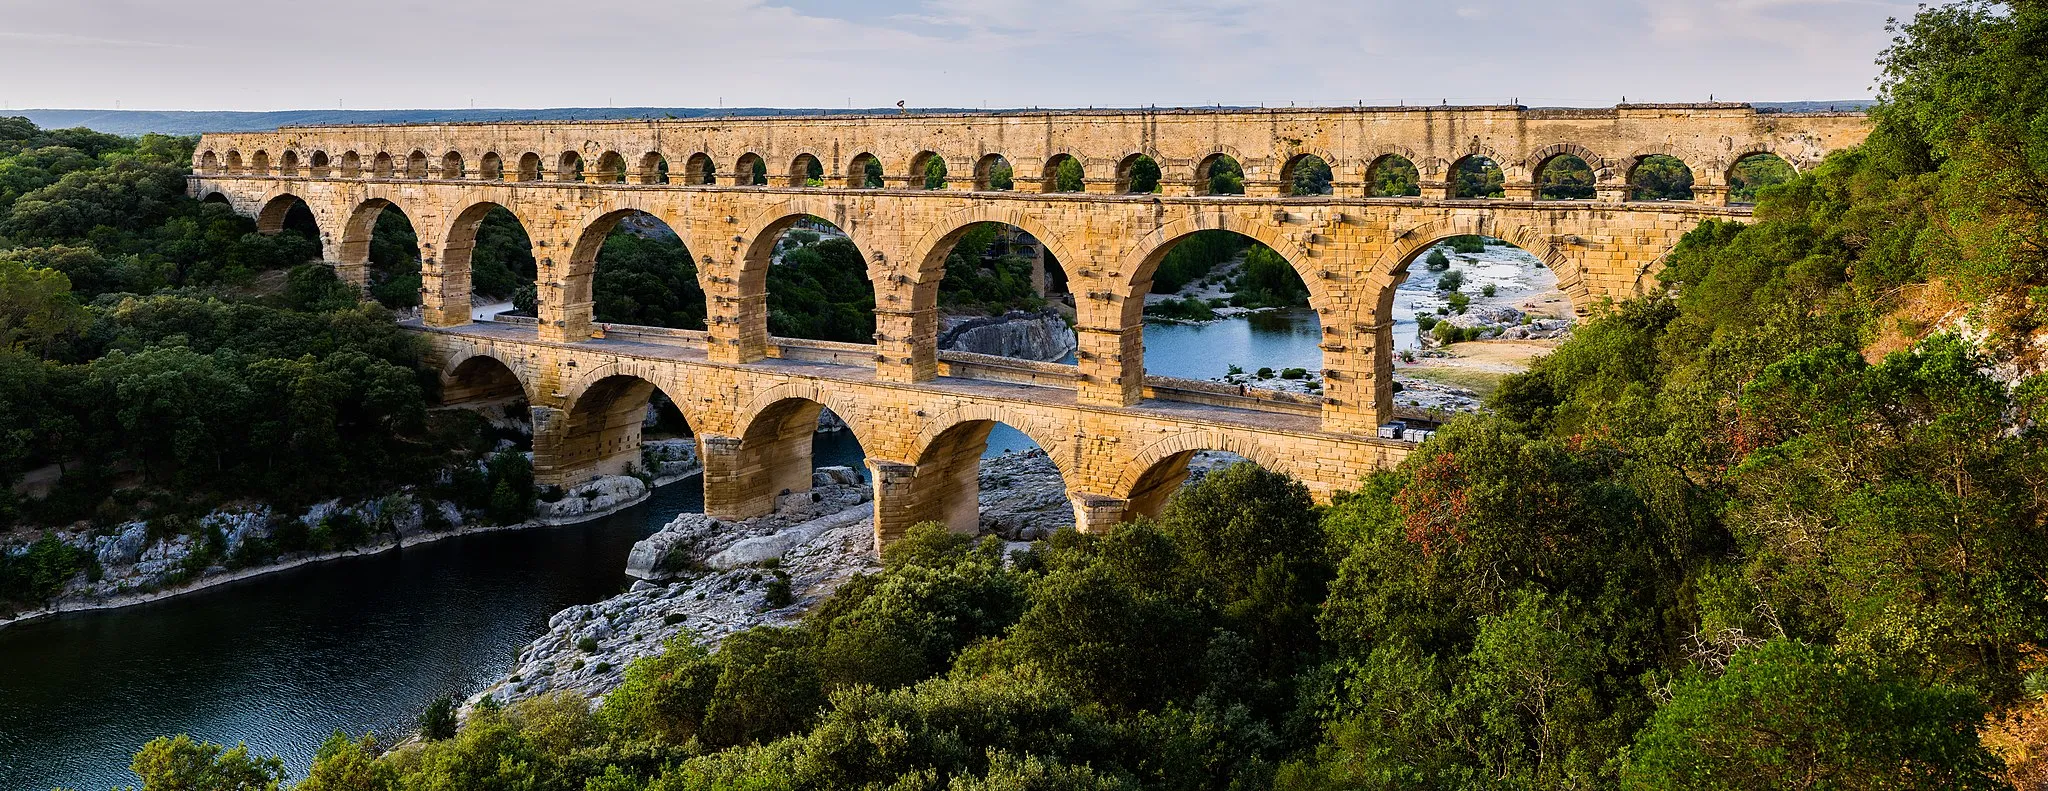 Photo showing: Pont du Gard, in Vers-Pont-du-Gard, Gard department, South France. The Pont du Gard is the most famous part of the roman aqueduct which carried water from Uzès to Nîmes until roughly the 9th century when maintenance was abandoned. The monument is 49m high and now 275m long (it was 360m when intact) at its top. It's the highest roman aqueduct, but also one of the best preserved (with the aqueduct of Segovia). The Pont du Gard has been a UNESCO world heritage site since 1985.